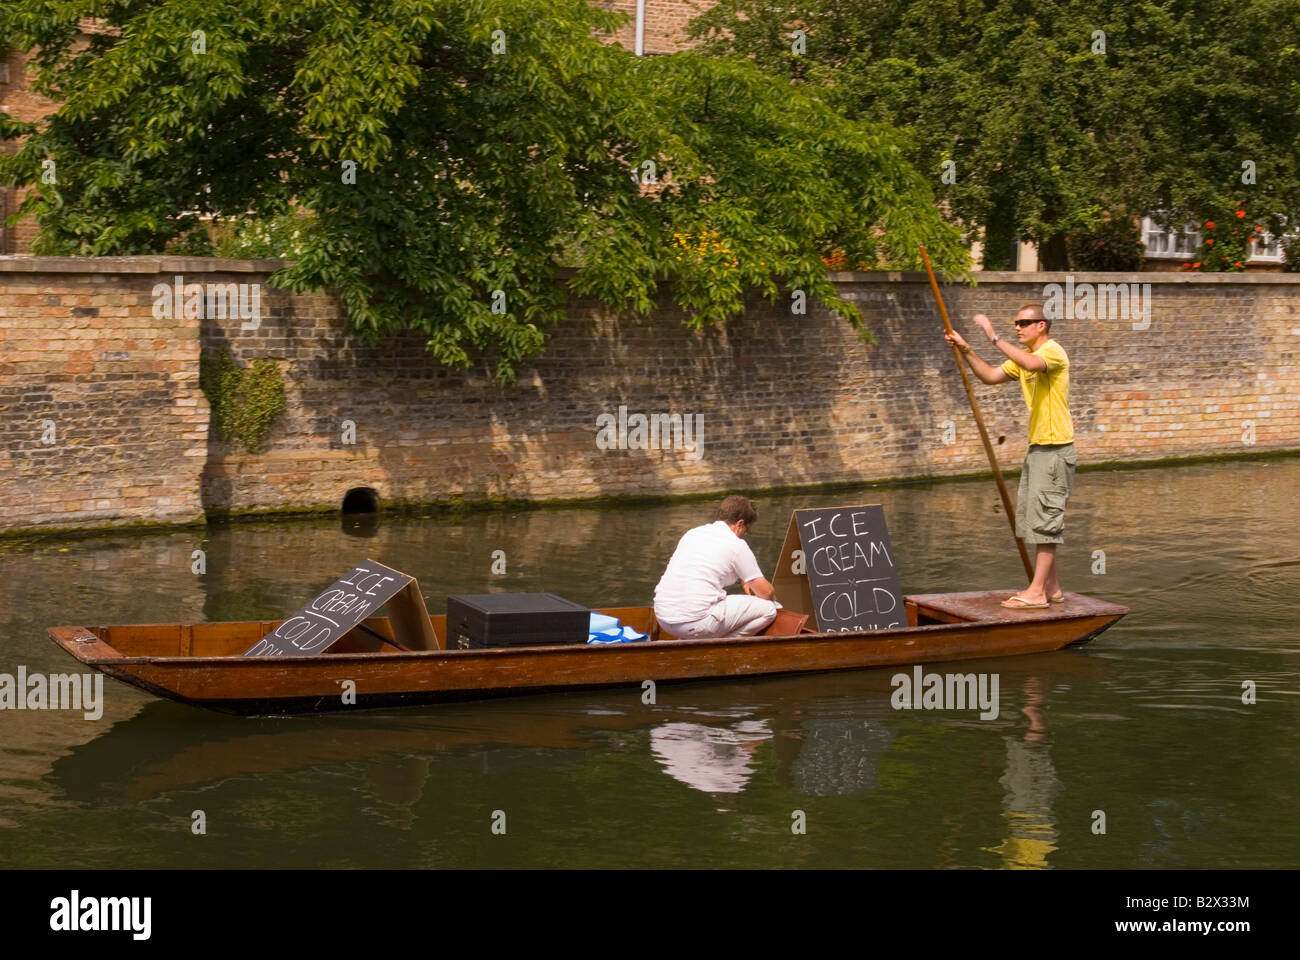 Ice cream being sold from a punt boat on the river Cam in Cambridge,Uk Stock Photo